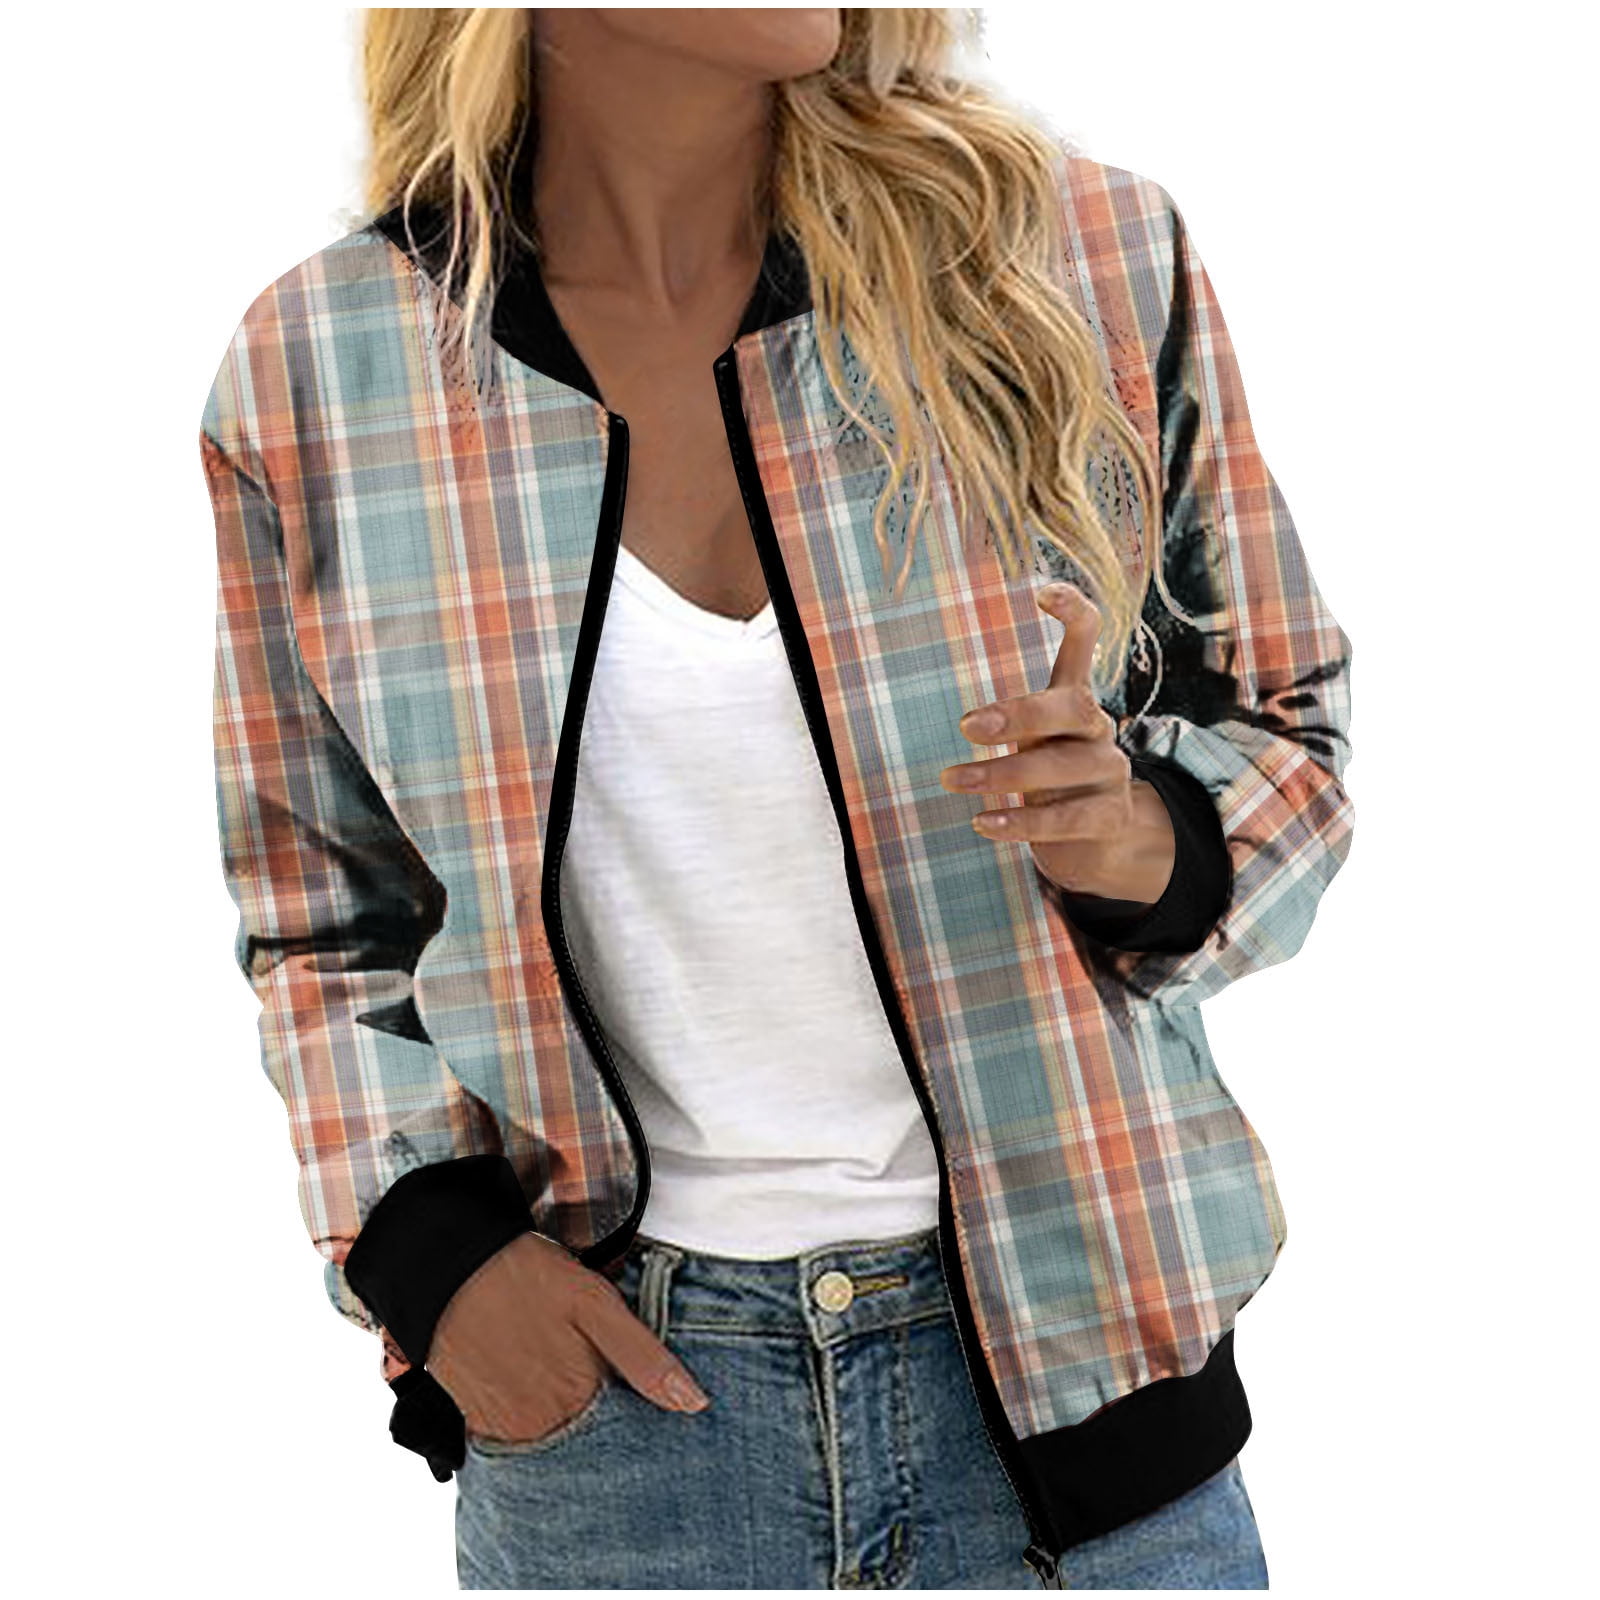 ZQGJB Long Sleeve Zip Up Thin Jackets for Women Spring Trendy Casual  Buffalo Plaid Stand Collar Graphic Bamber Jacket Lightweight Outwear 